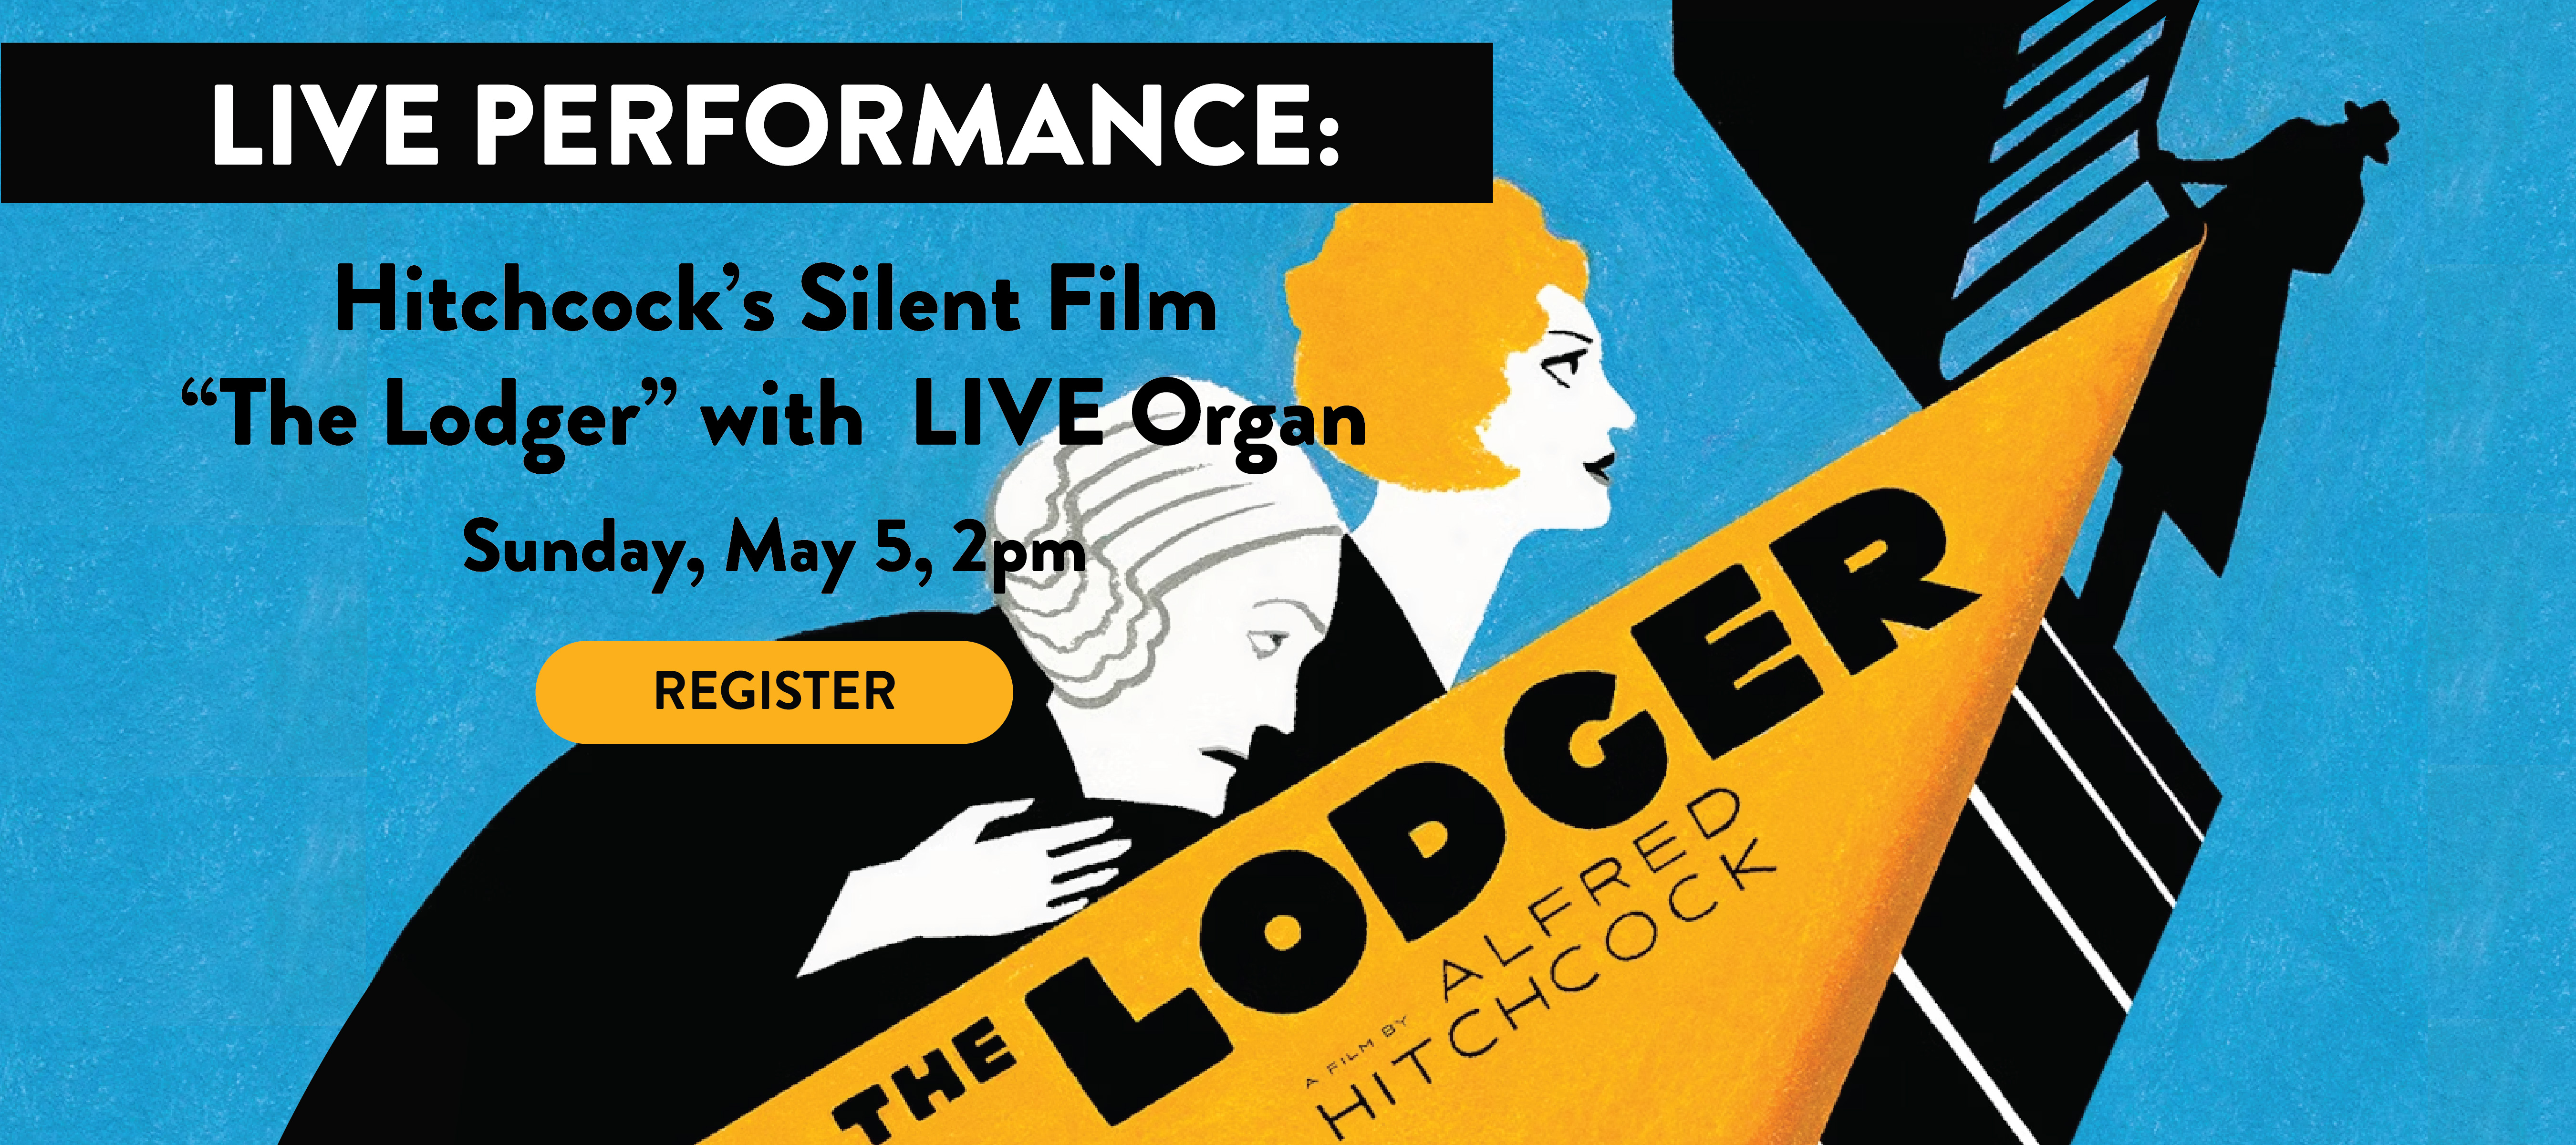 phpl, Prospect Heights Public Library, live performance, Alfred Hitchcock, The Lodger, live organ, silent film, film showing, vintage film, Adult